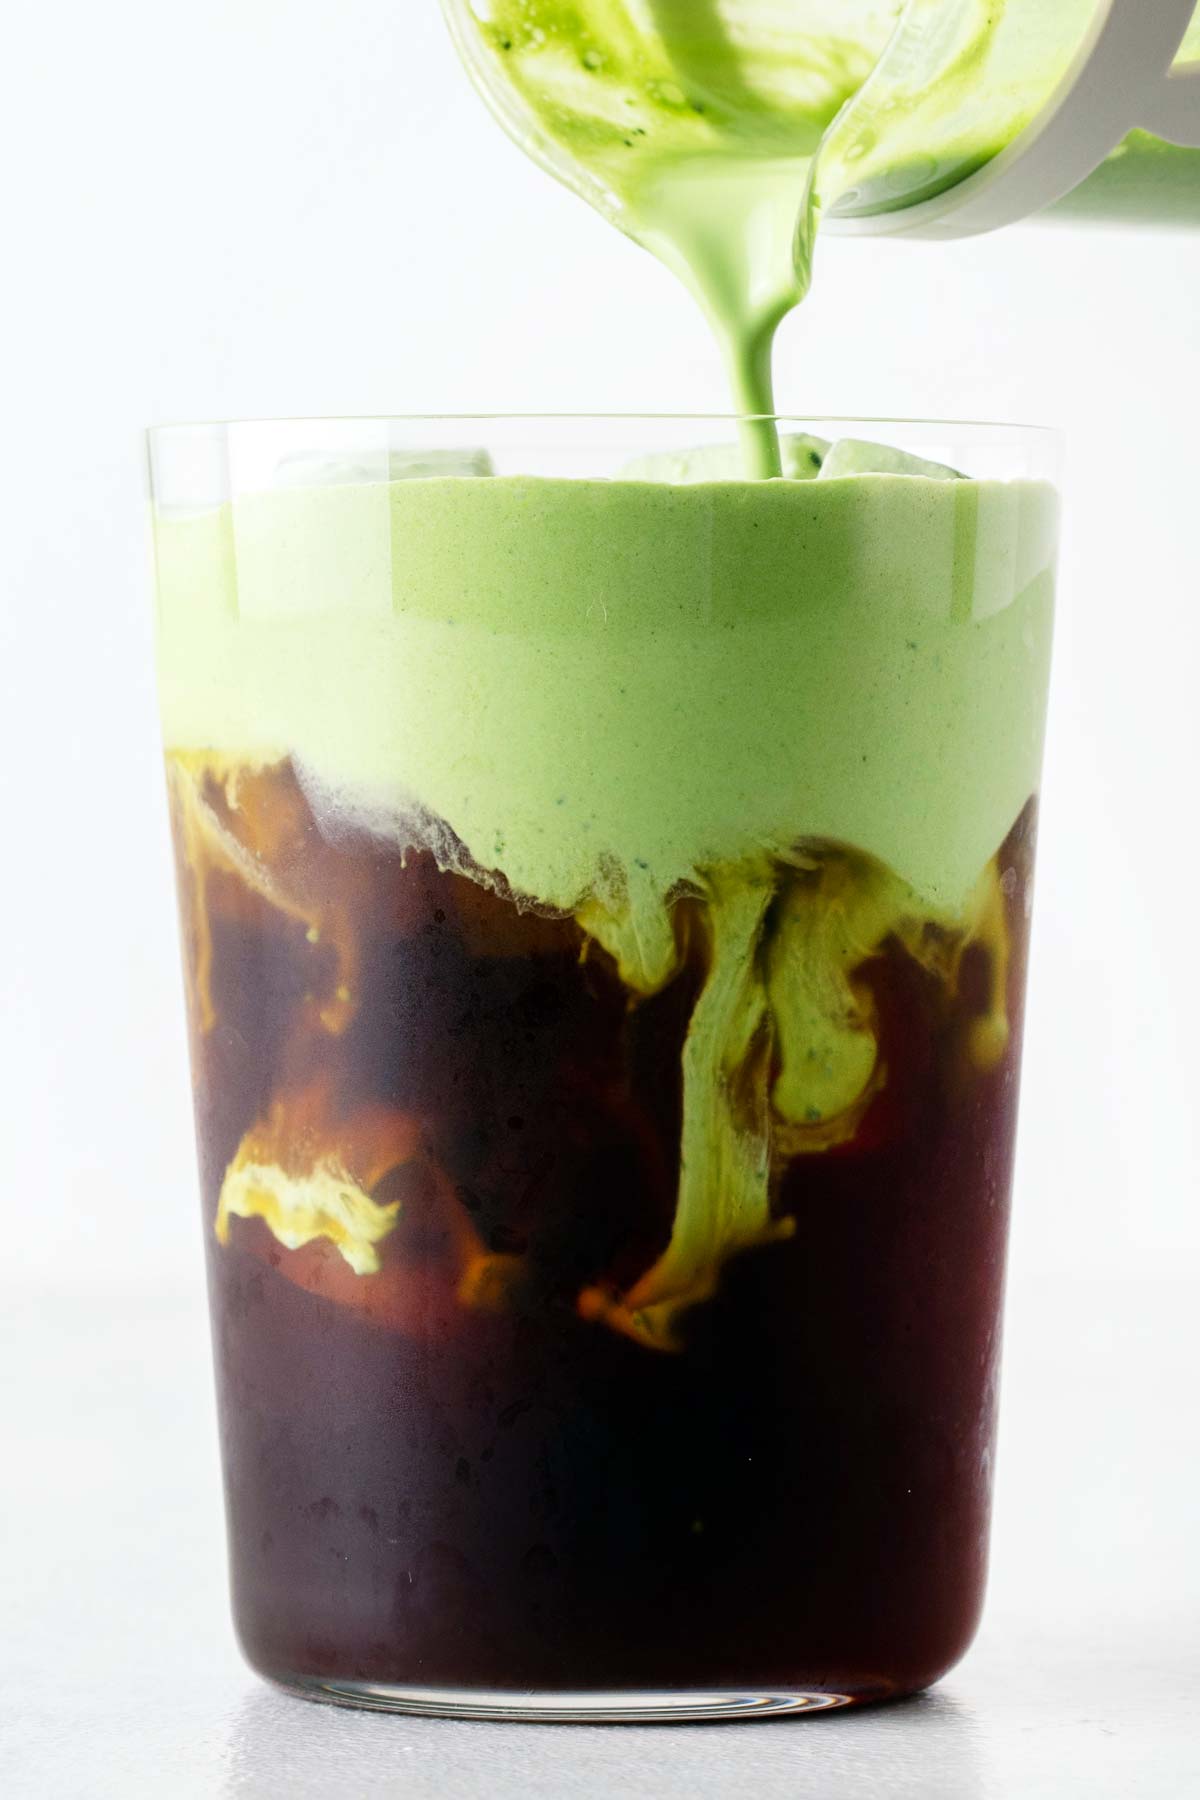 Matcha cold foam being poured over an iced coffee in a large glass.